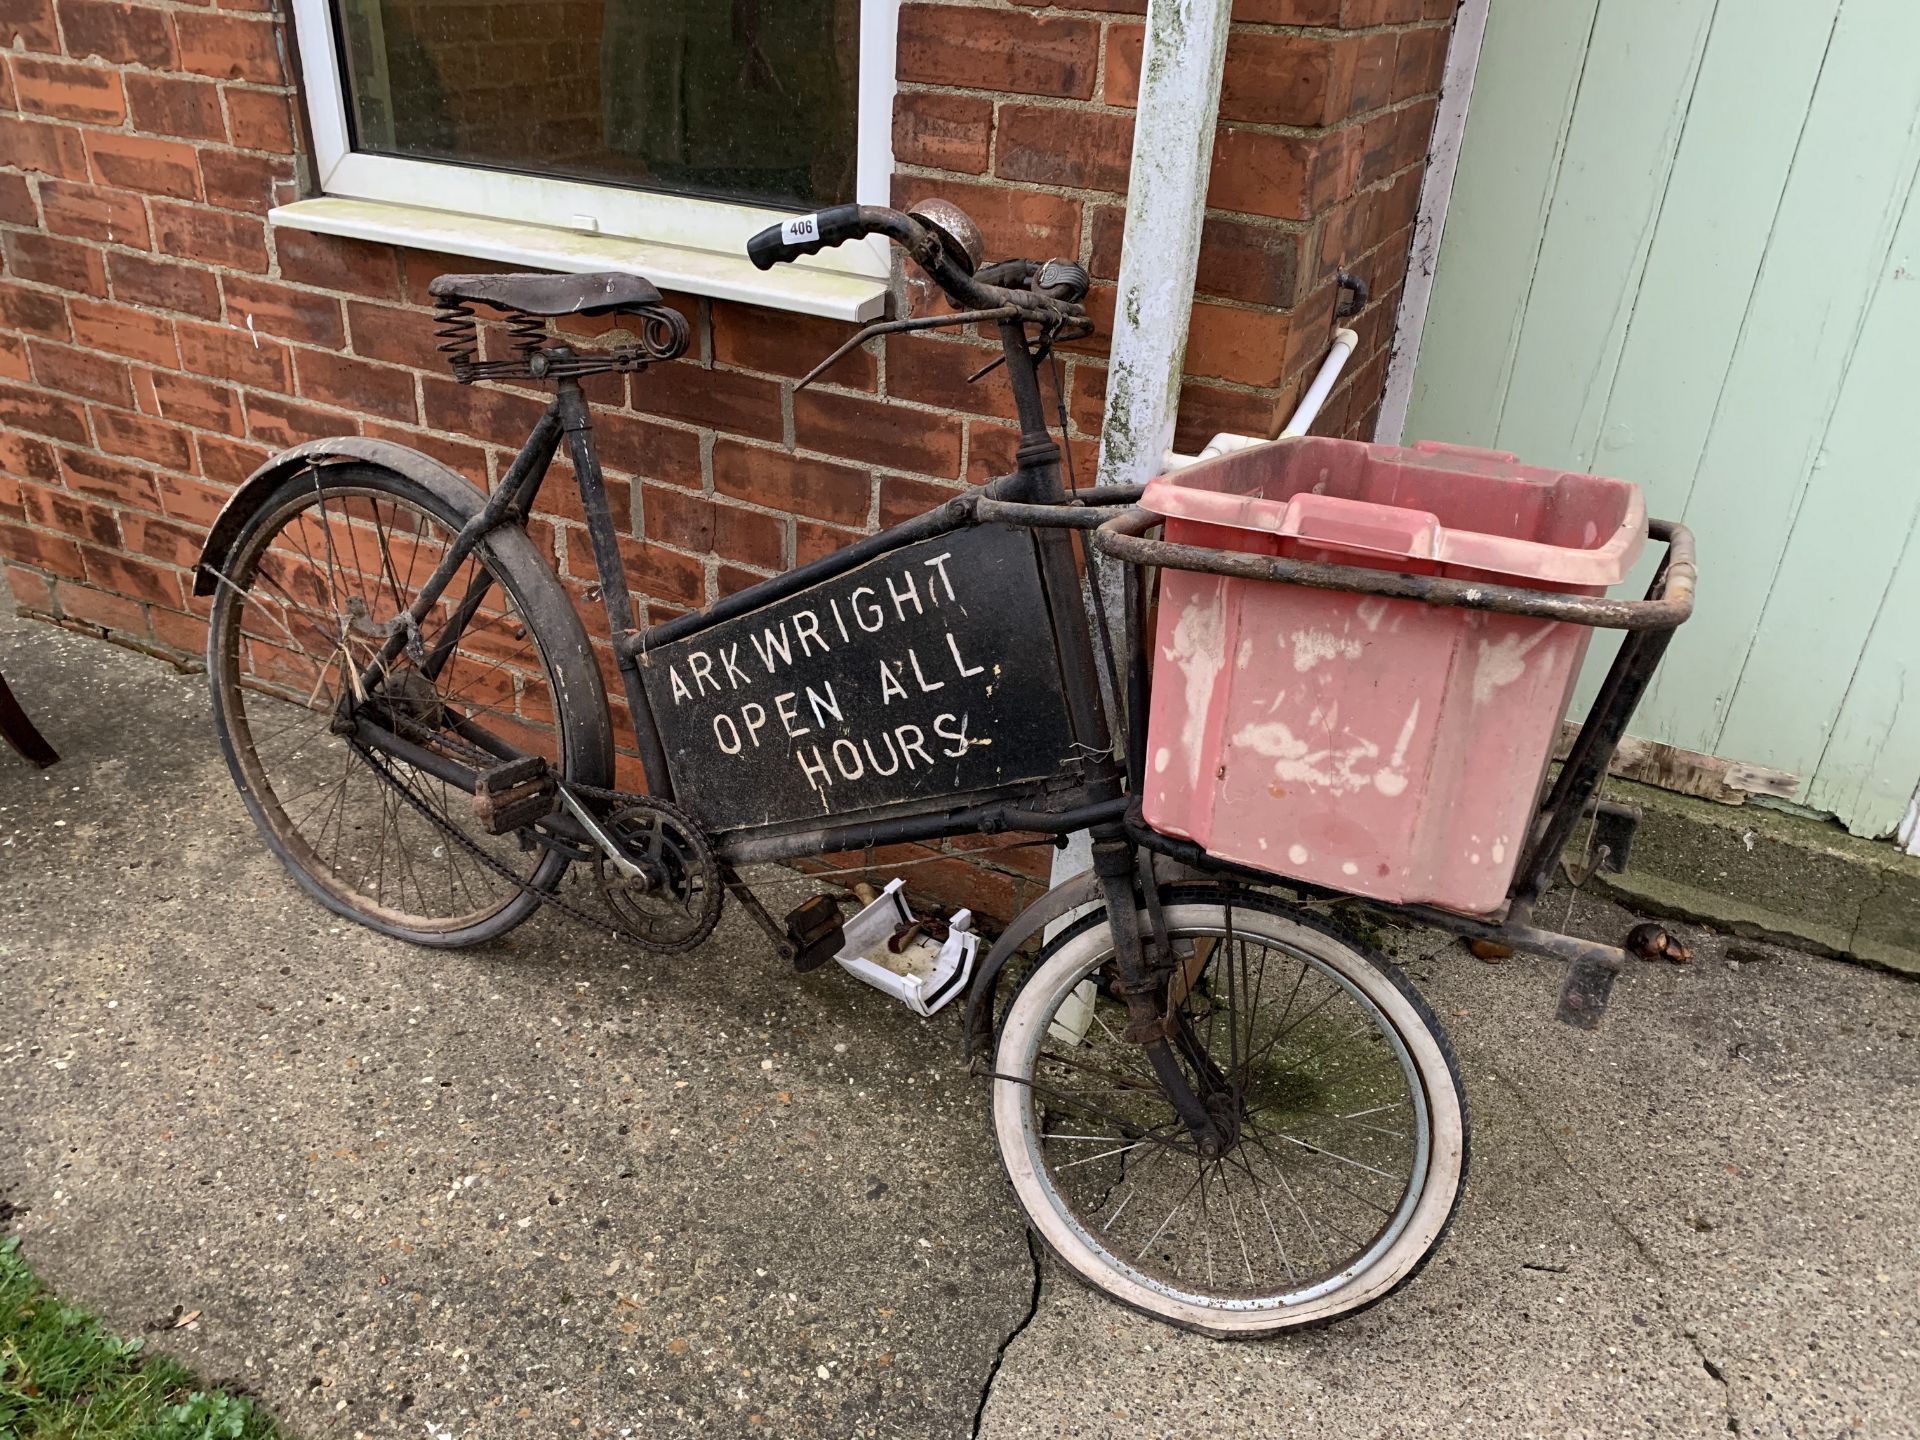 'Arkwirght Open All Hours' delivery bike